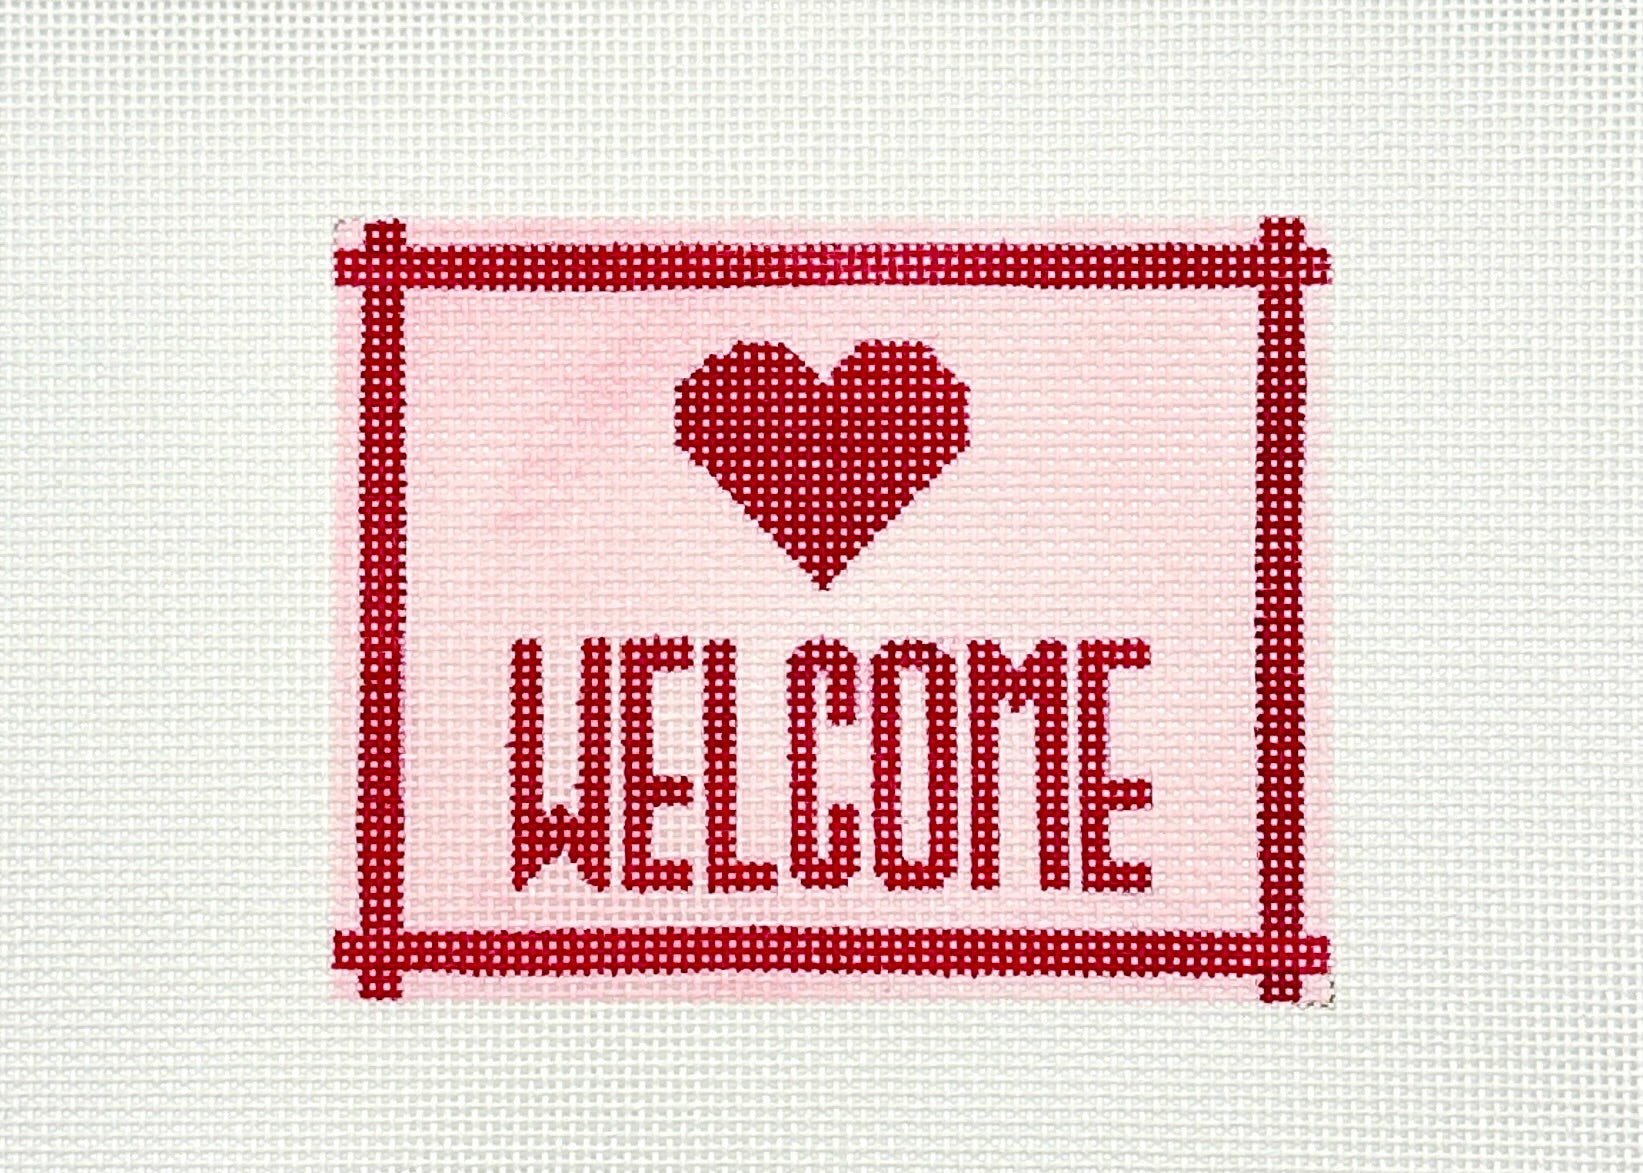 Welcome: Red Heart